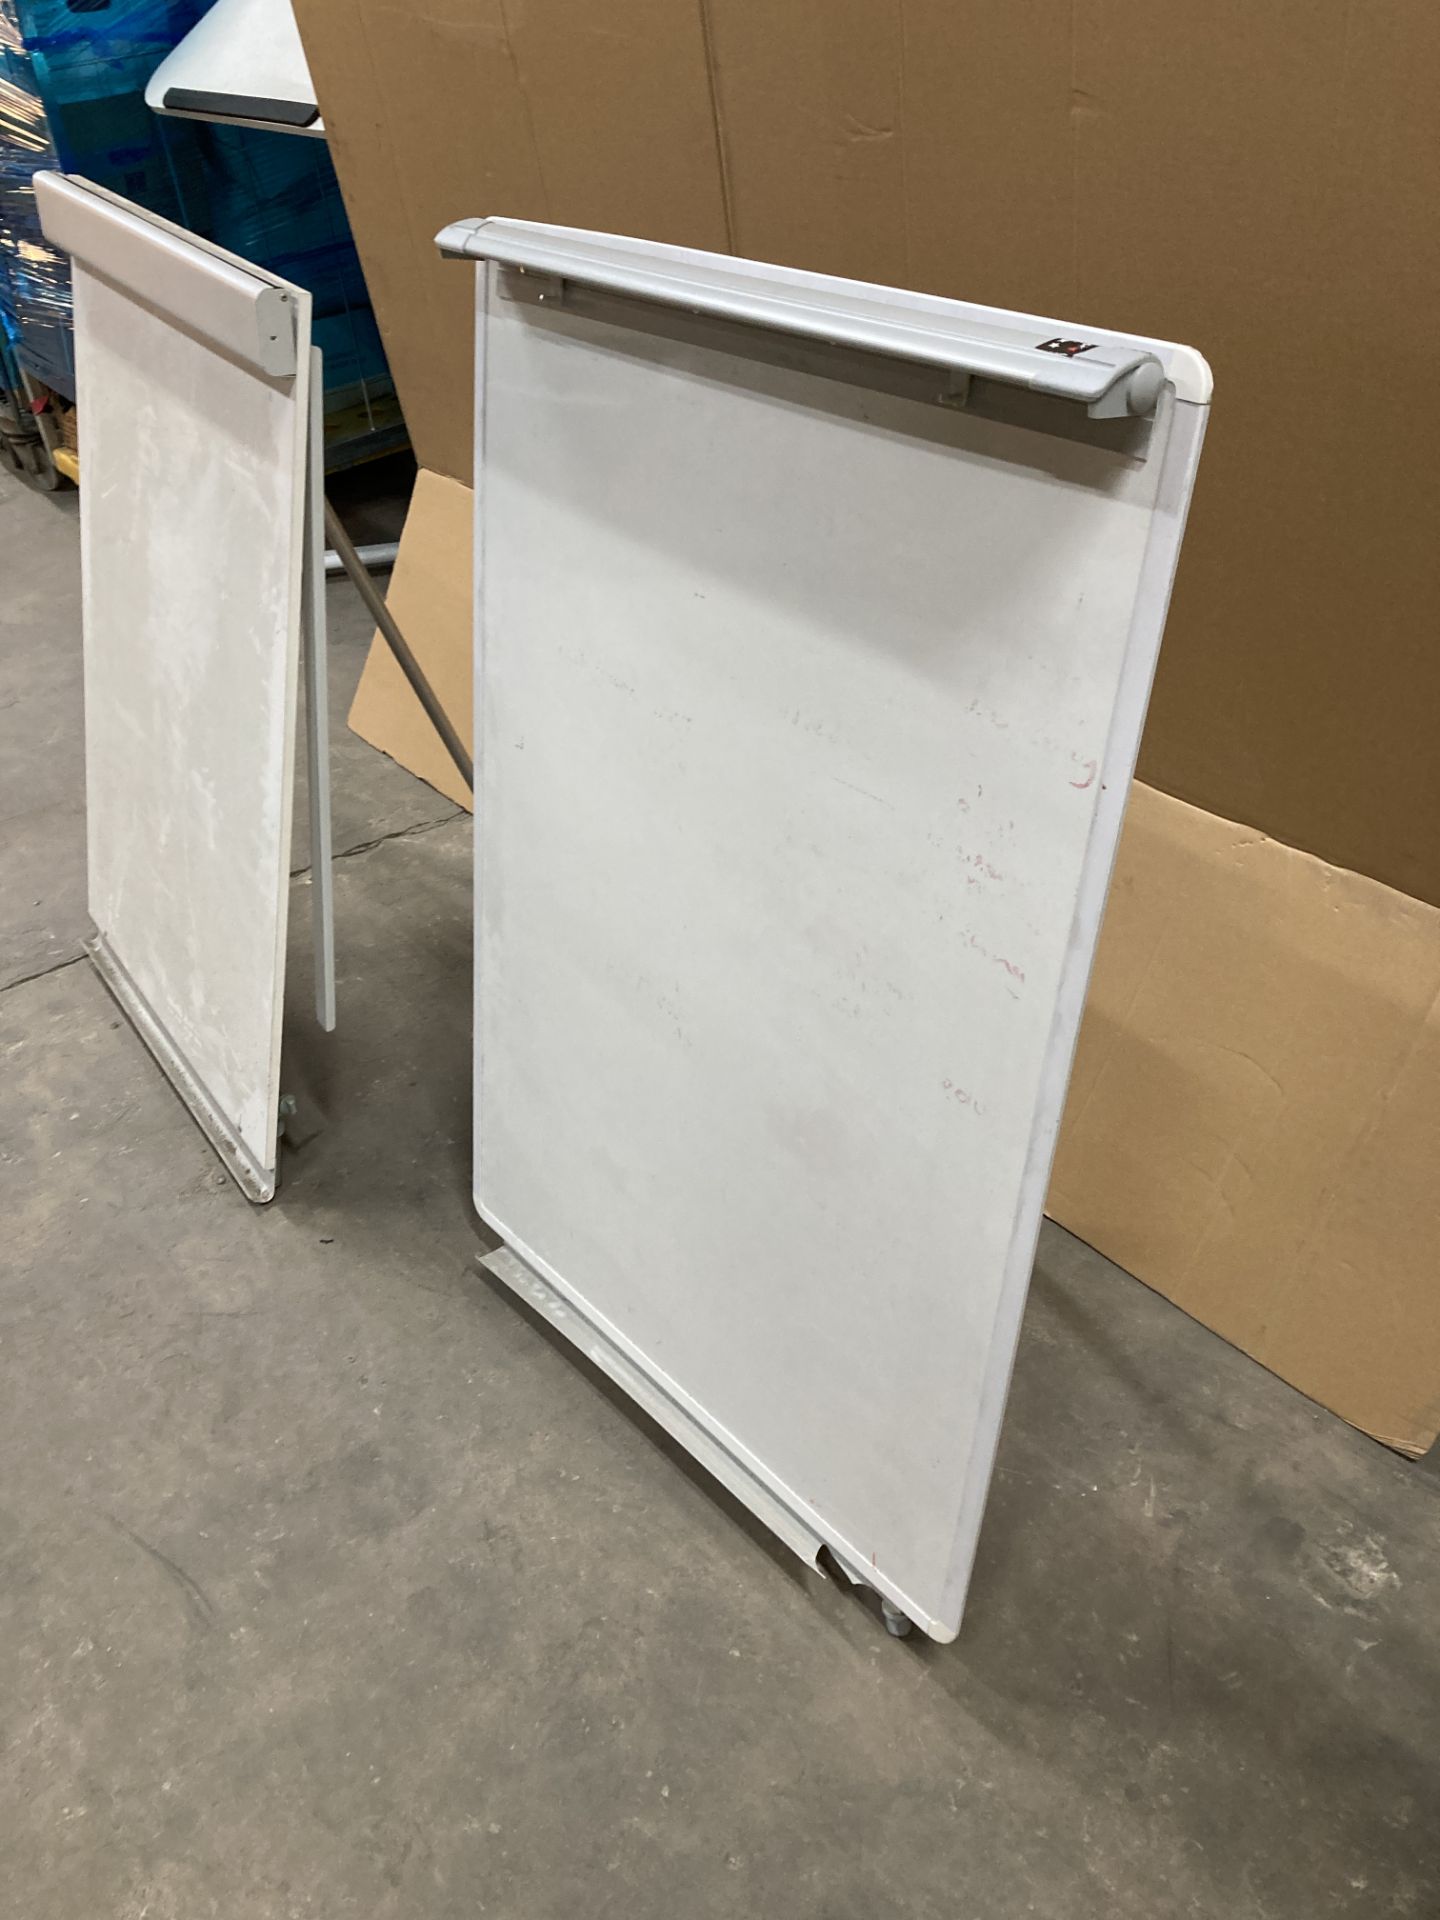 2 x Tripod Whiteboards/Paper Display Stands - Image 2 of 3